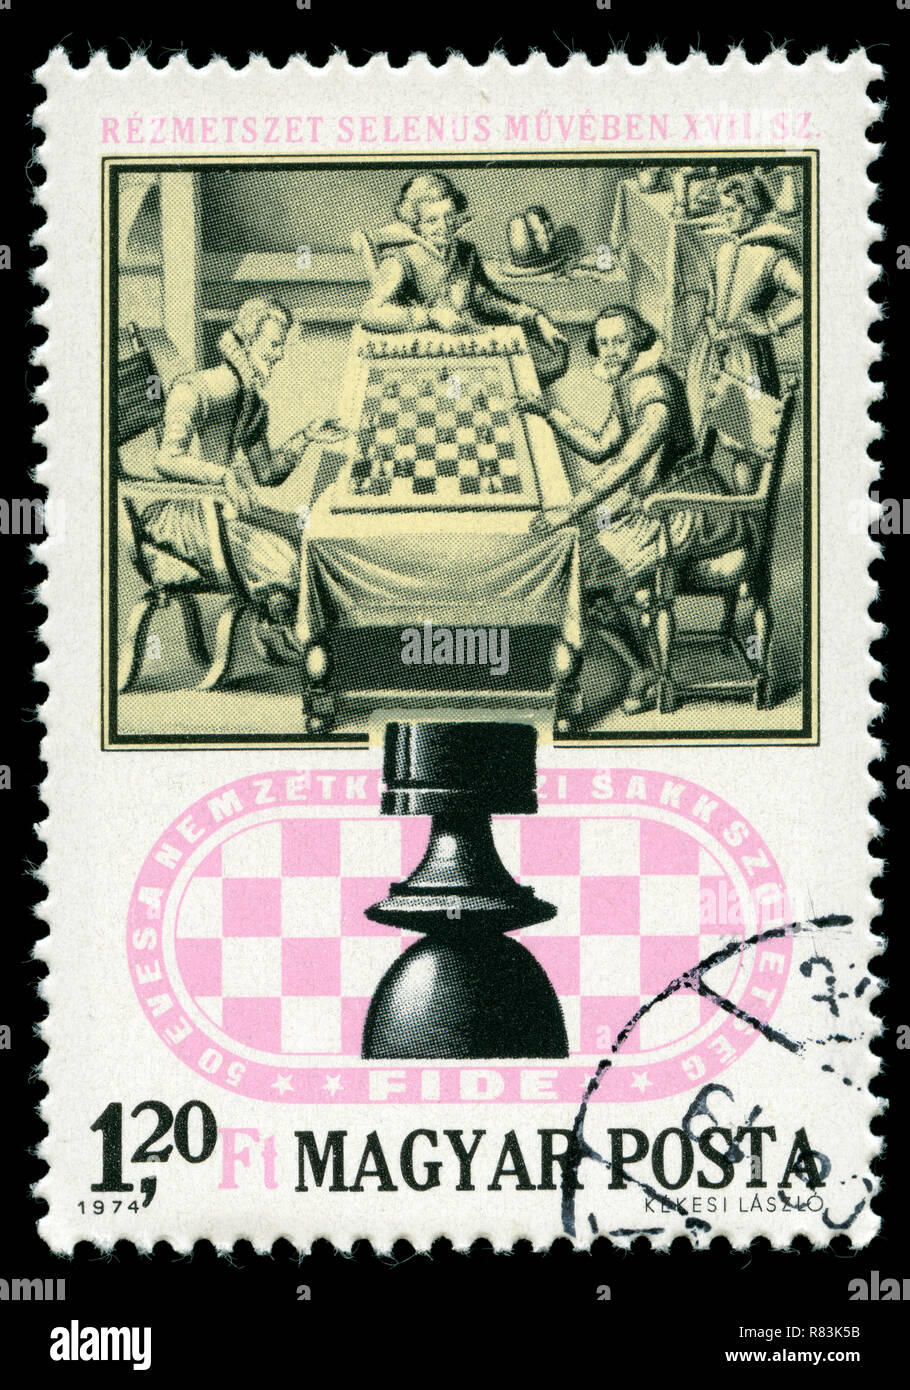 Postage stamp from Hungary in the 50th Anniversary of the International Chess Federation series issued in 1974 Stock Photo